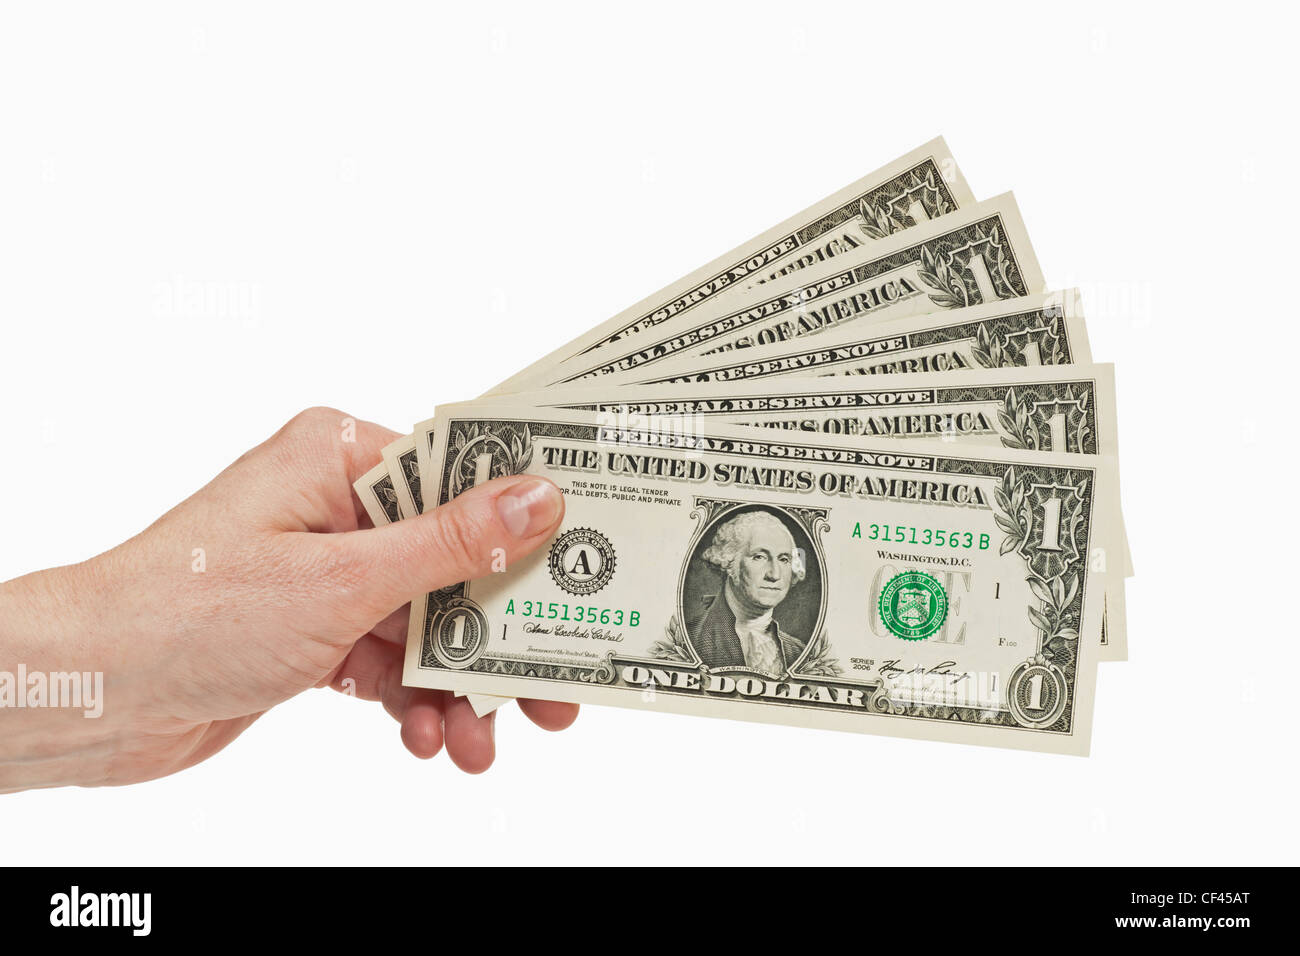 Five 1 U.S. Dollar bills are held in the hand, white background Stock Photo